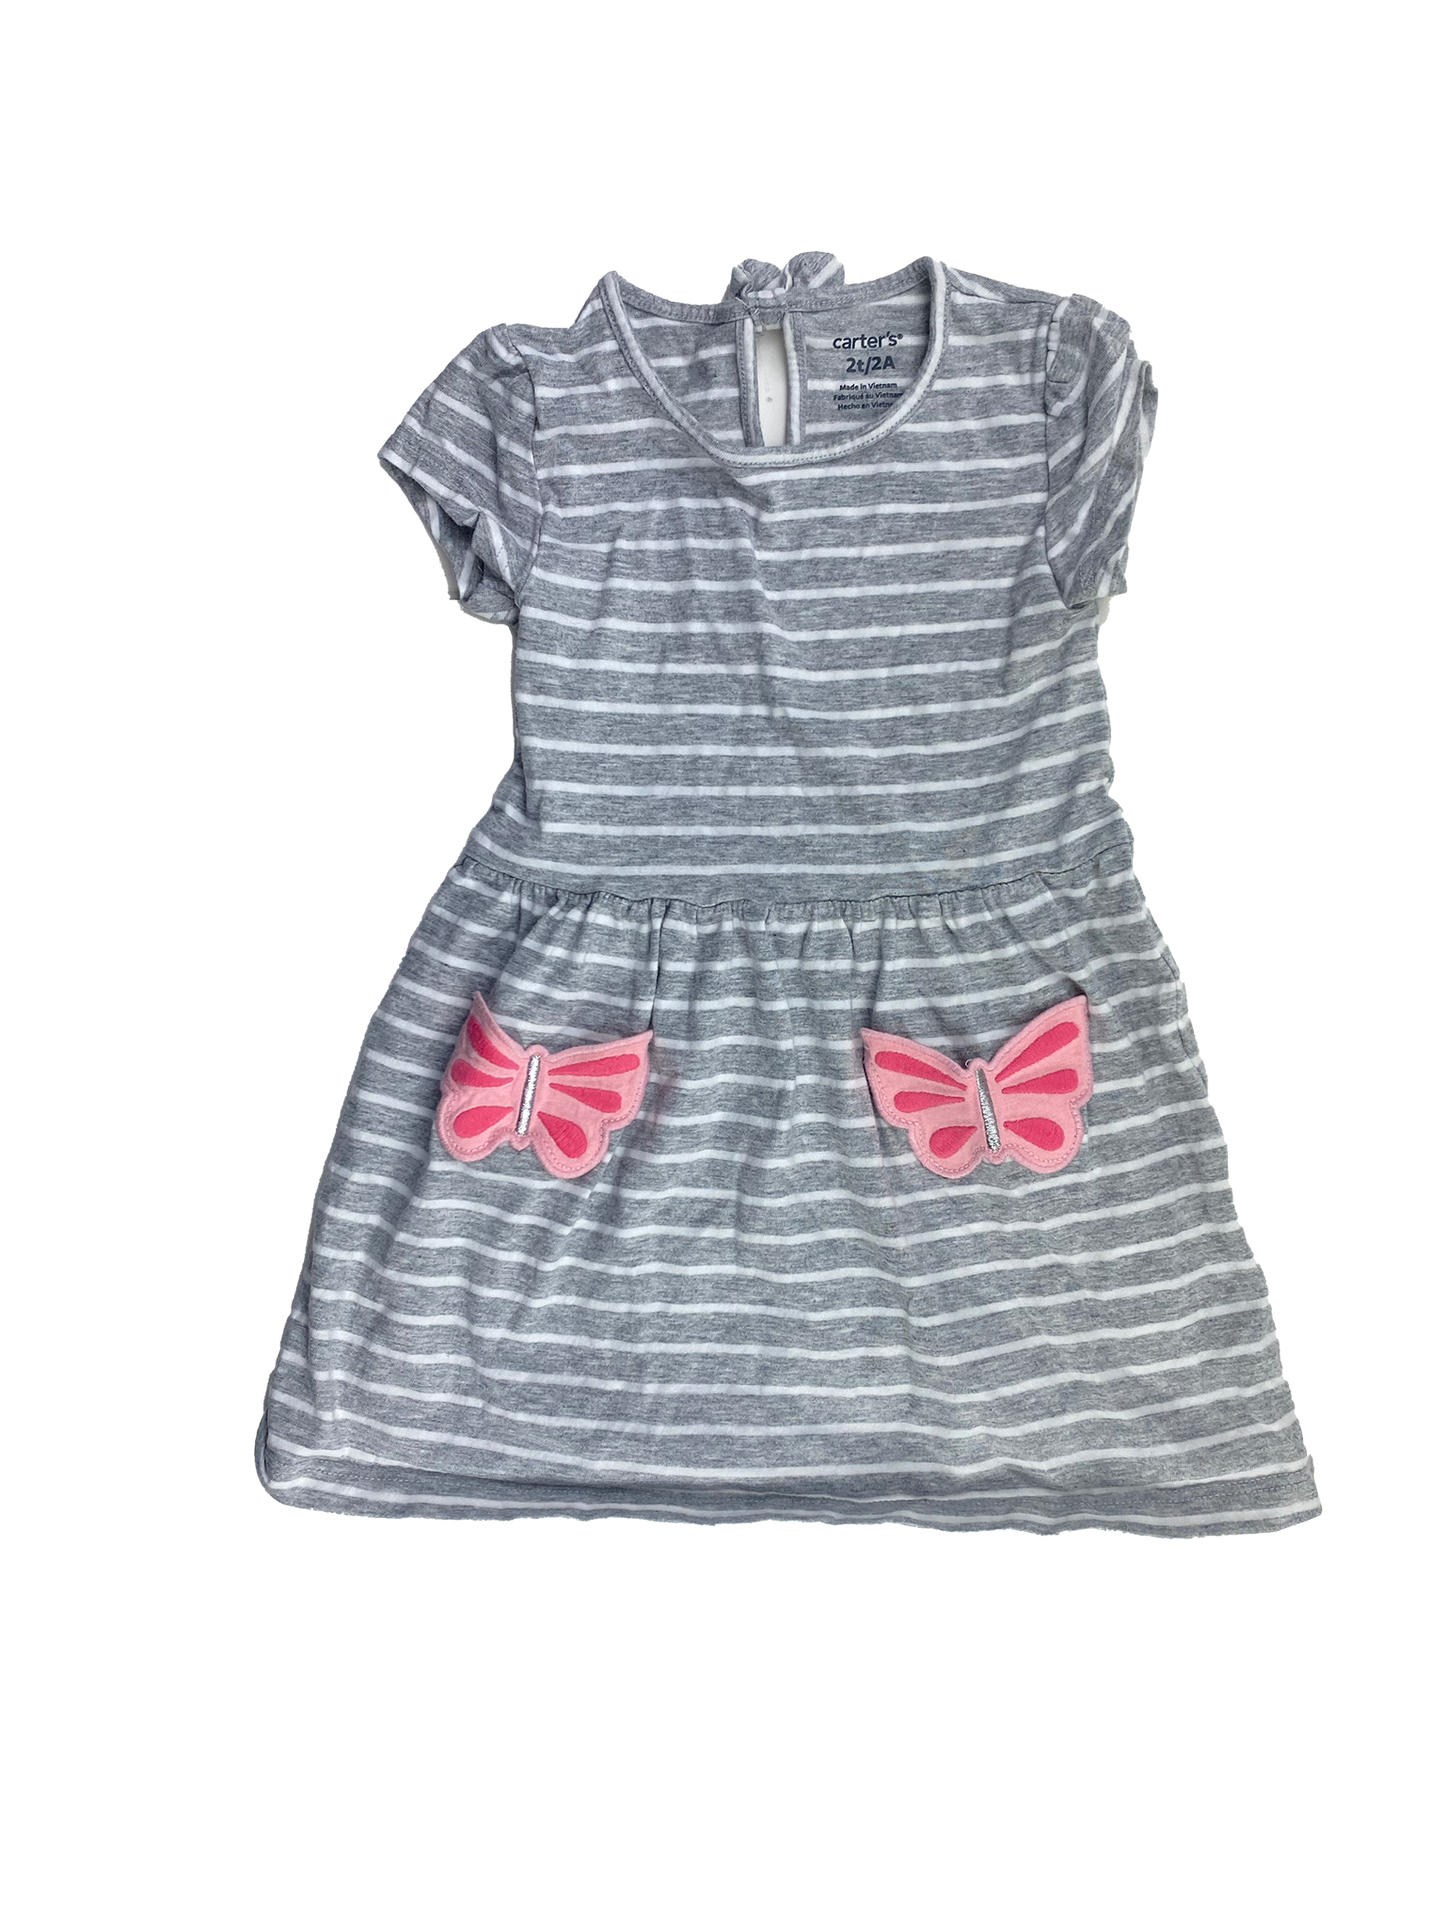 Carter's Grey Dress with Butterfly Pockets 2T